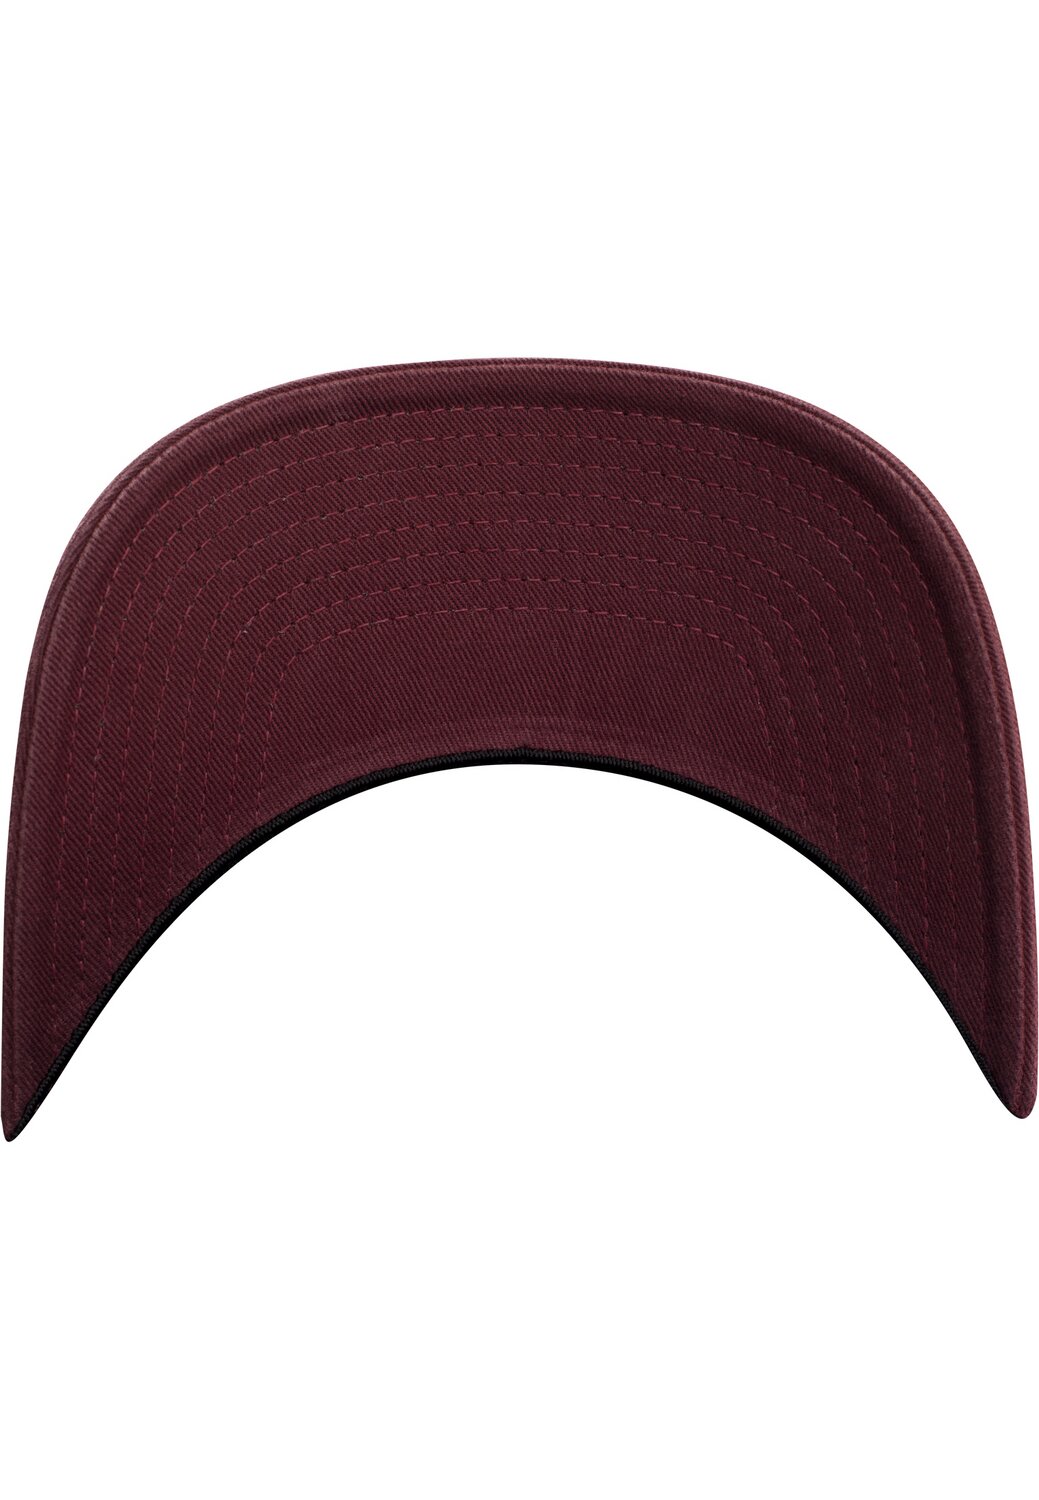 Garment | Dad Cotton maroon Hat MAXISCOOT Flexfit Washed